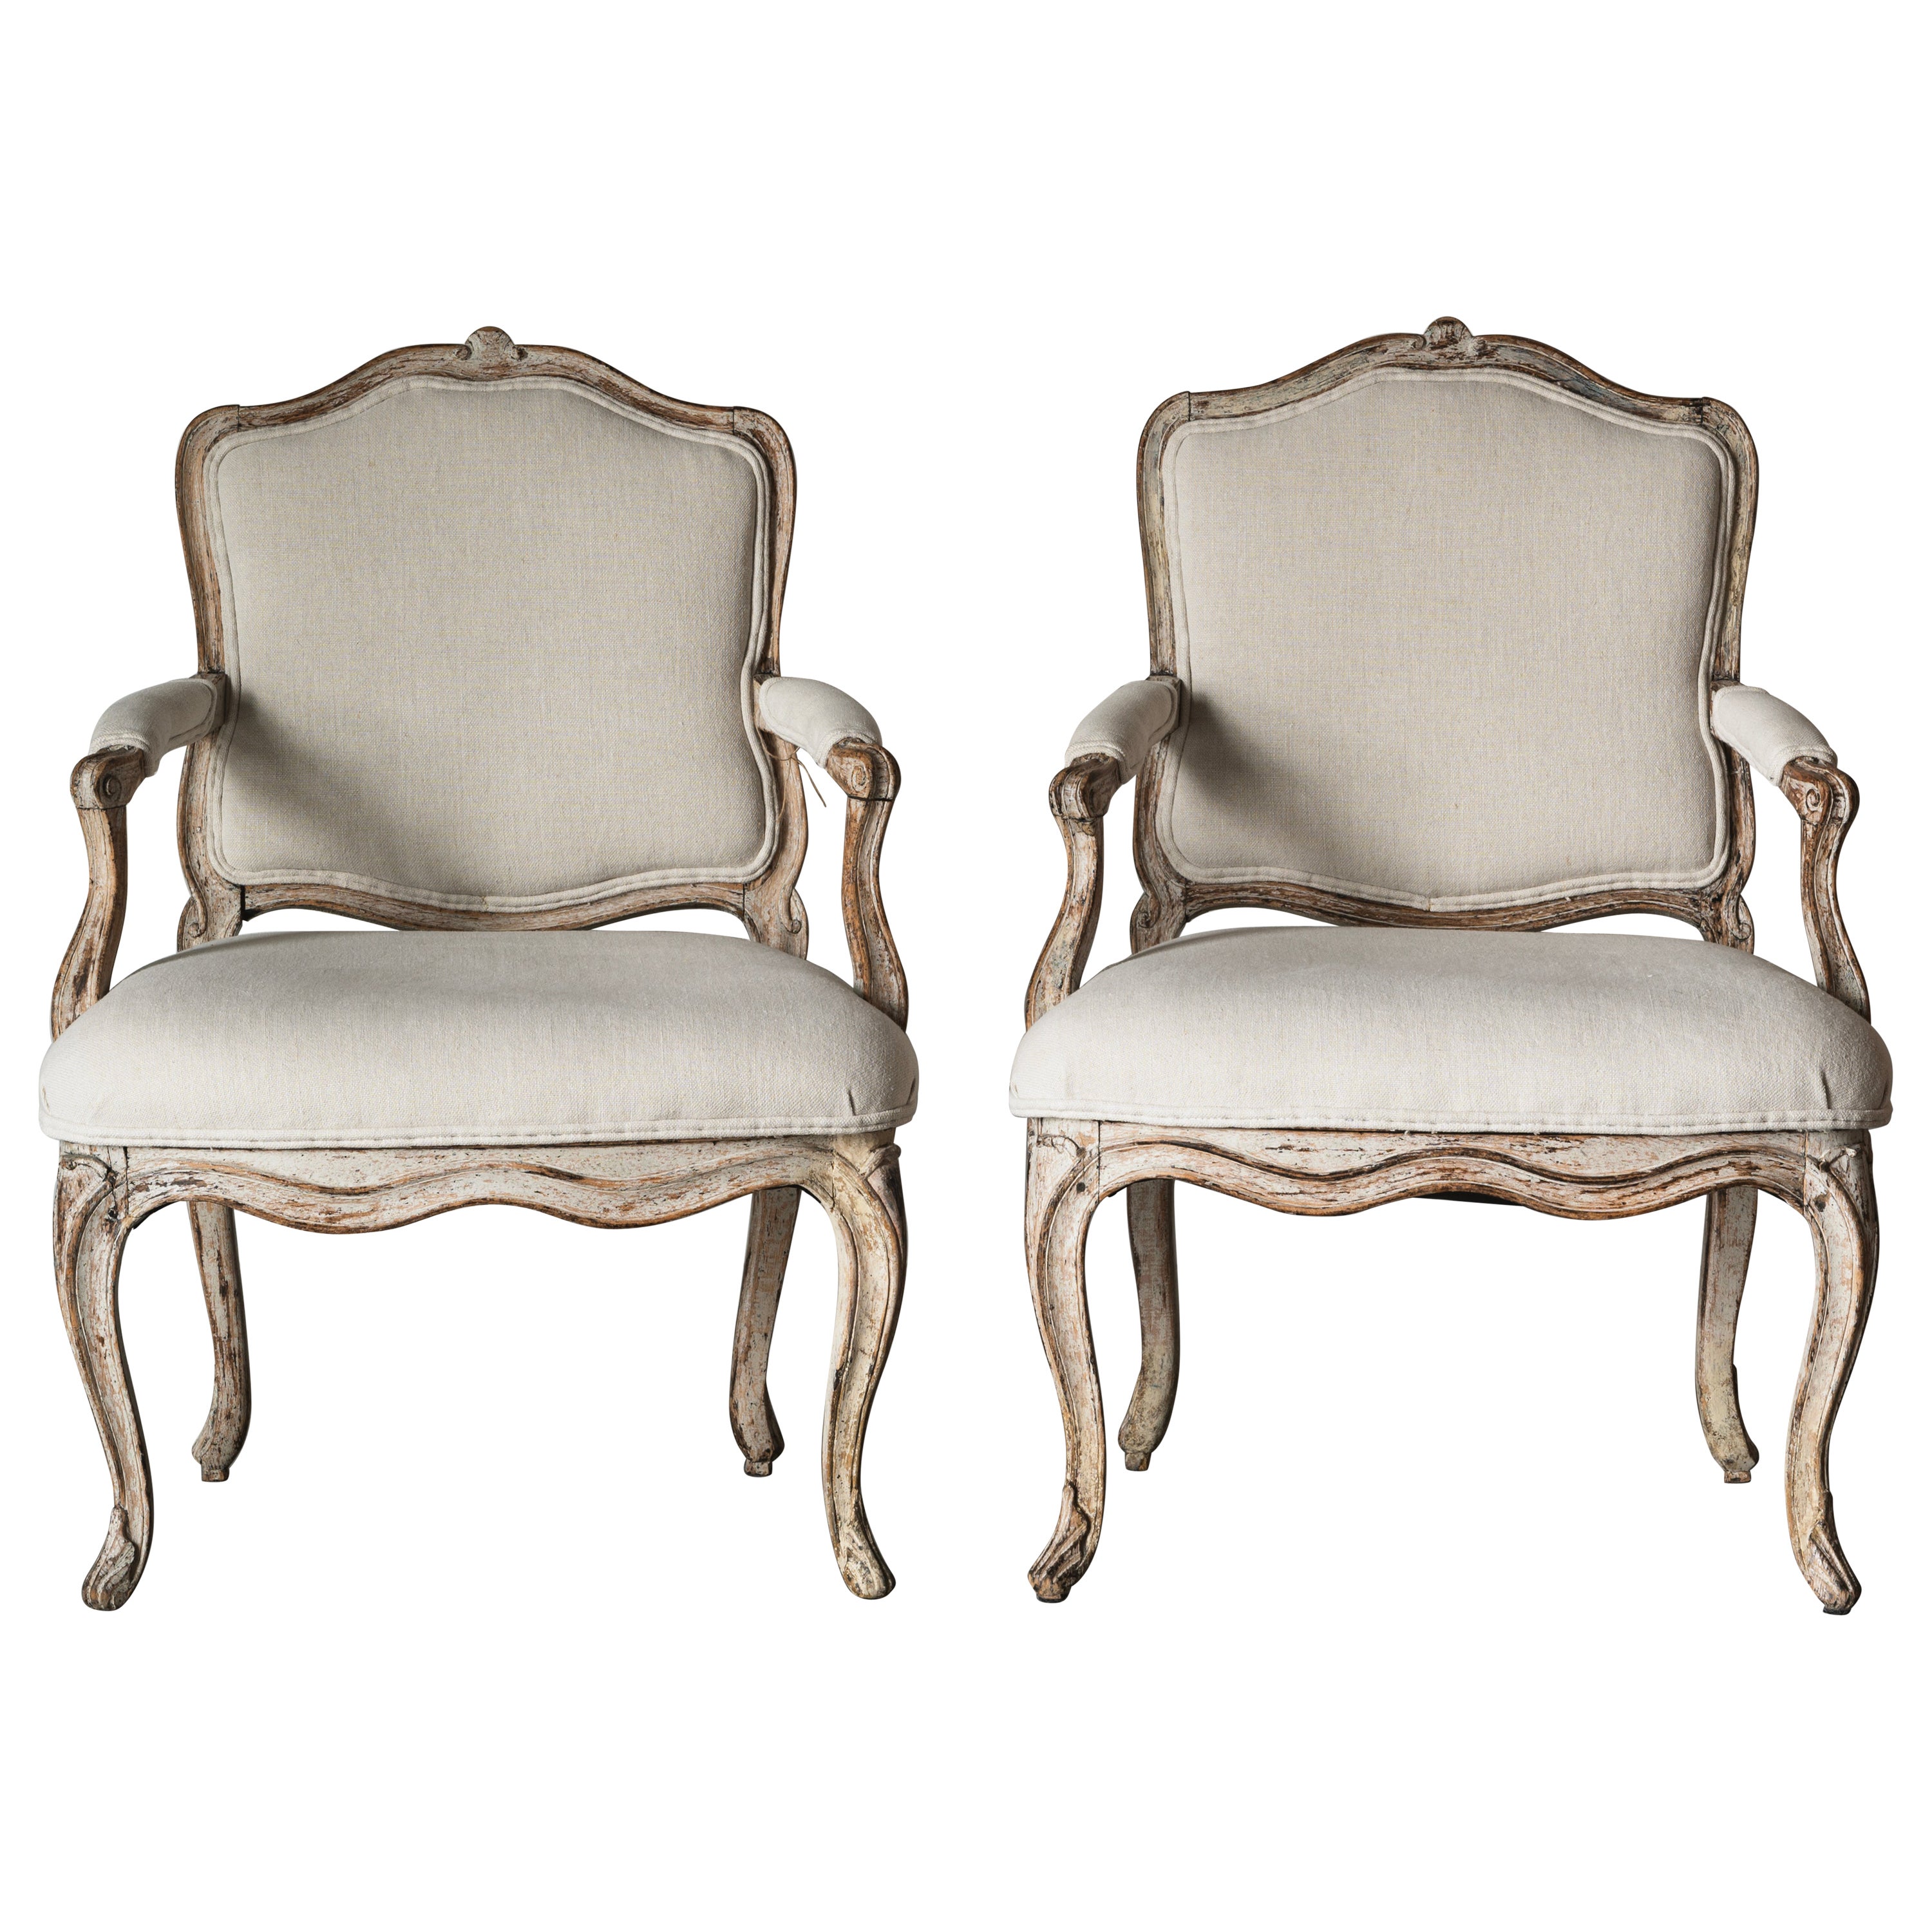 Fine Pair of 18th Century Swedish Rococo Armchairs For Sale